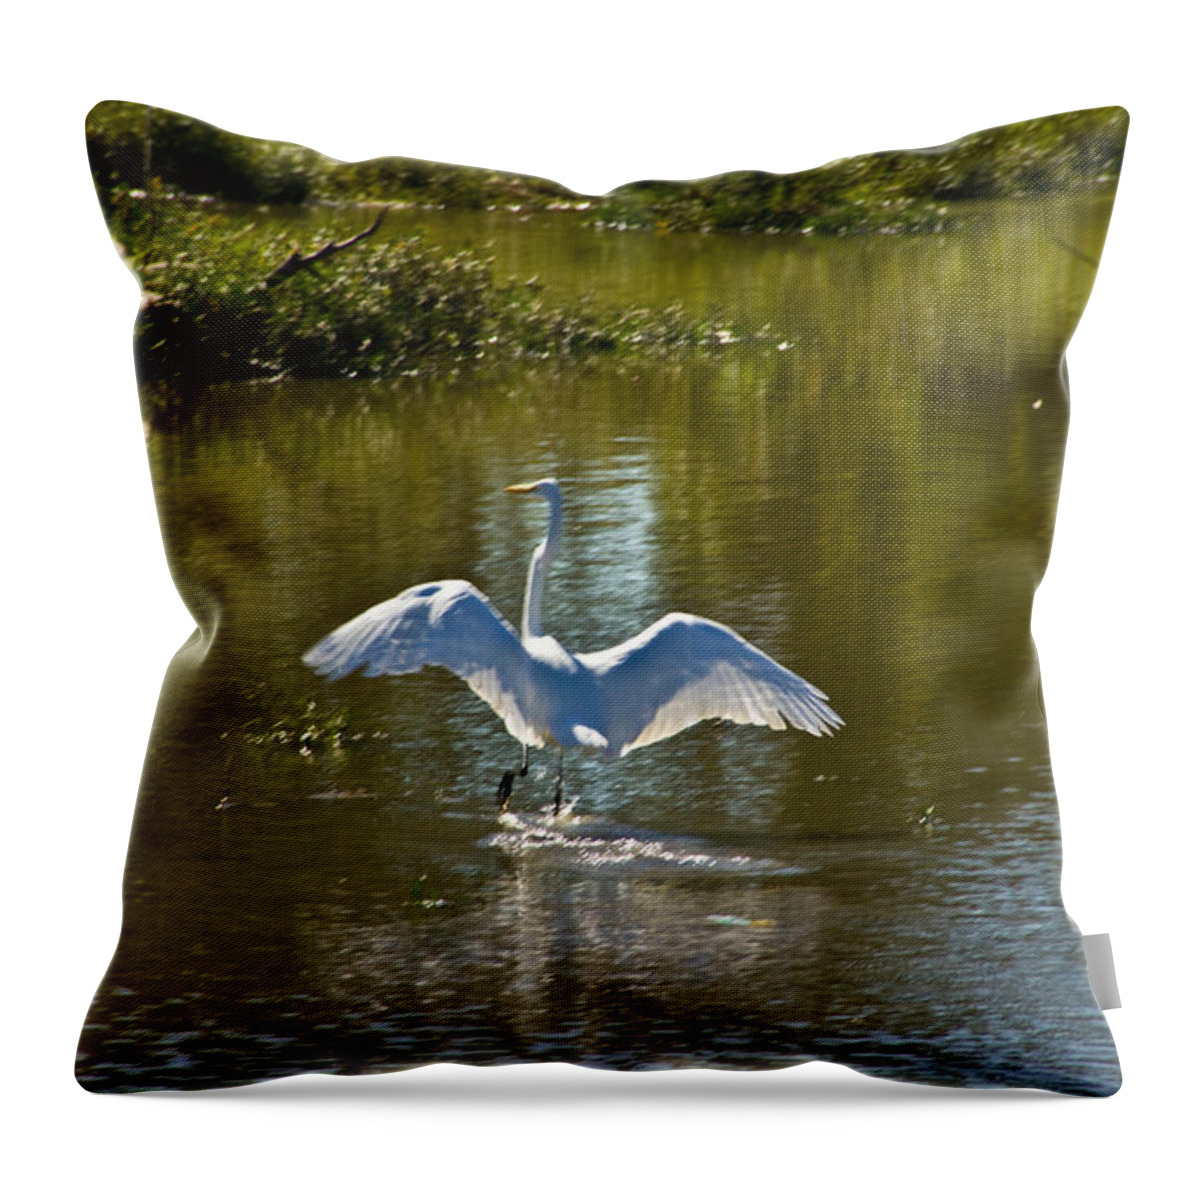 Tulsa Photographs Throw Pillow featuring the photograph Great White Egret In Sunlight by Vernis Maxwell